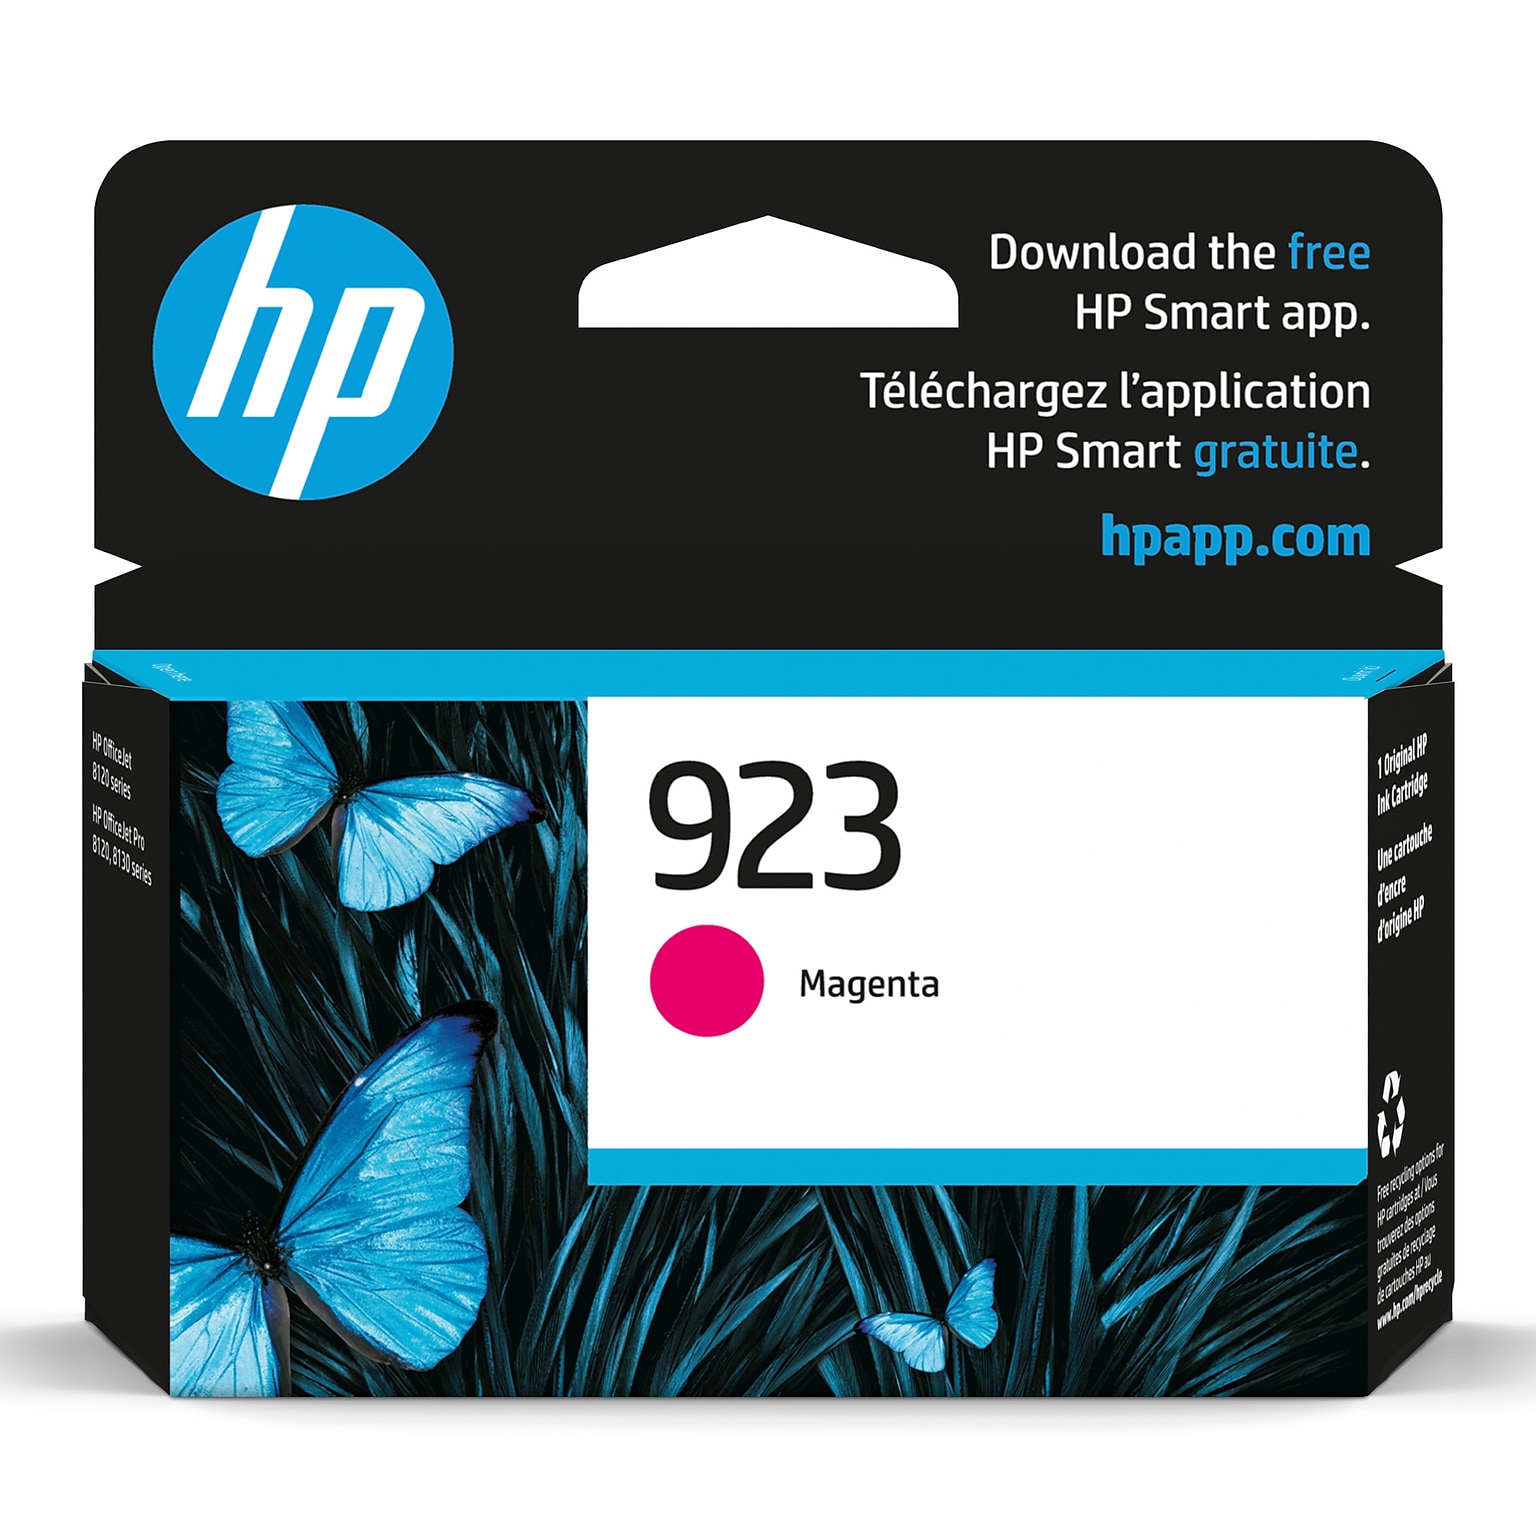 HP 923 Magenta Standard Yield Ink Cartridge (4K0T1LN), print up to 400 pages